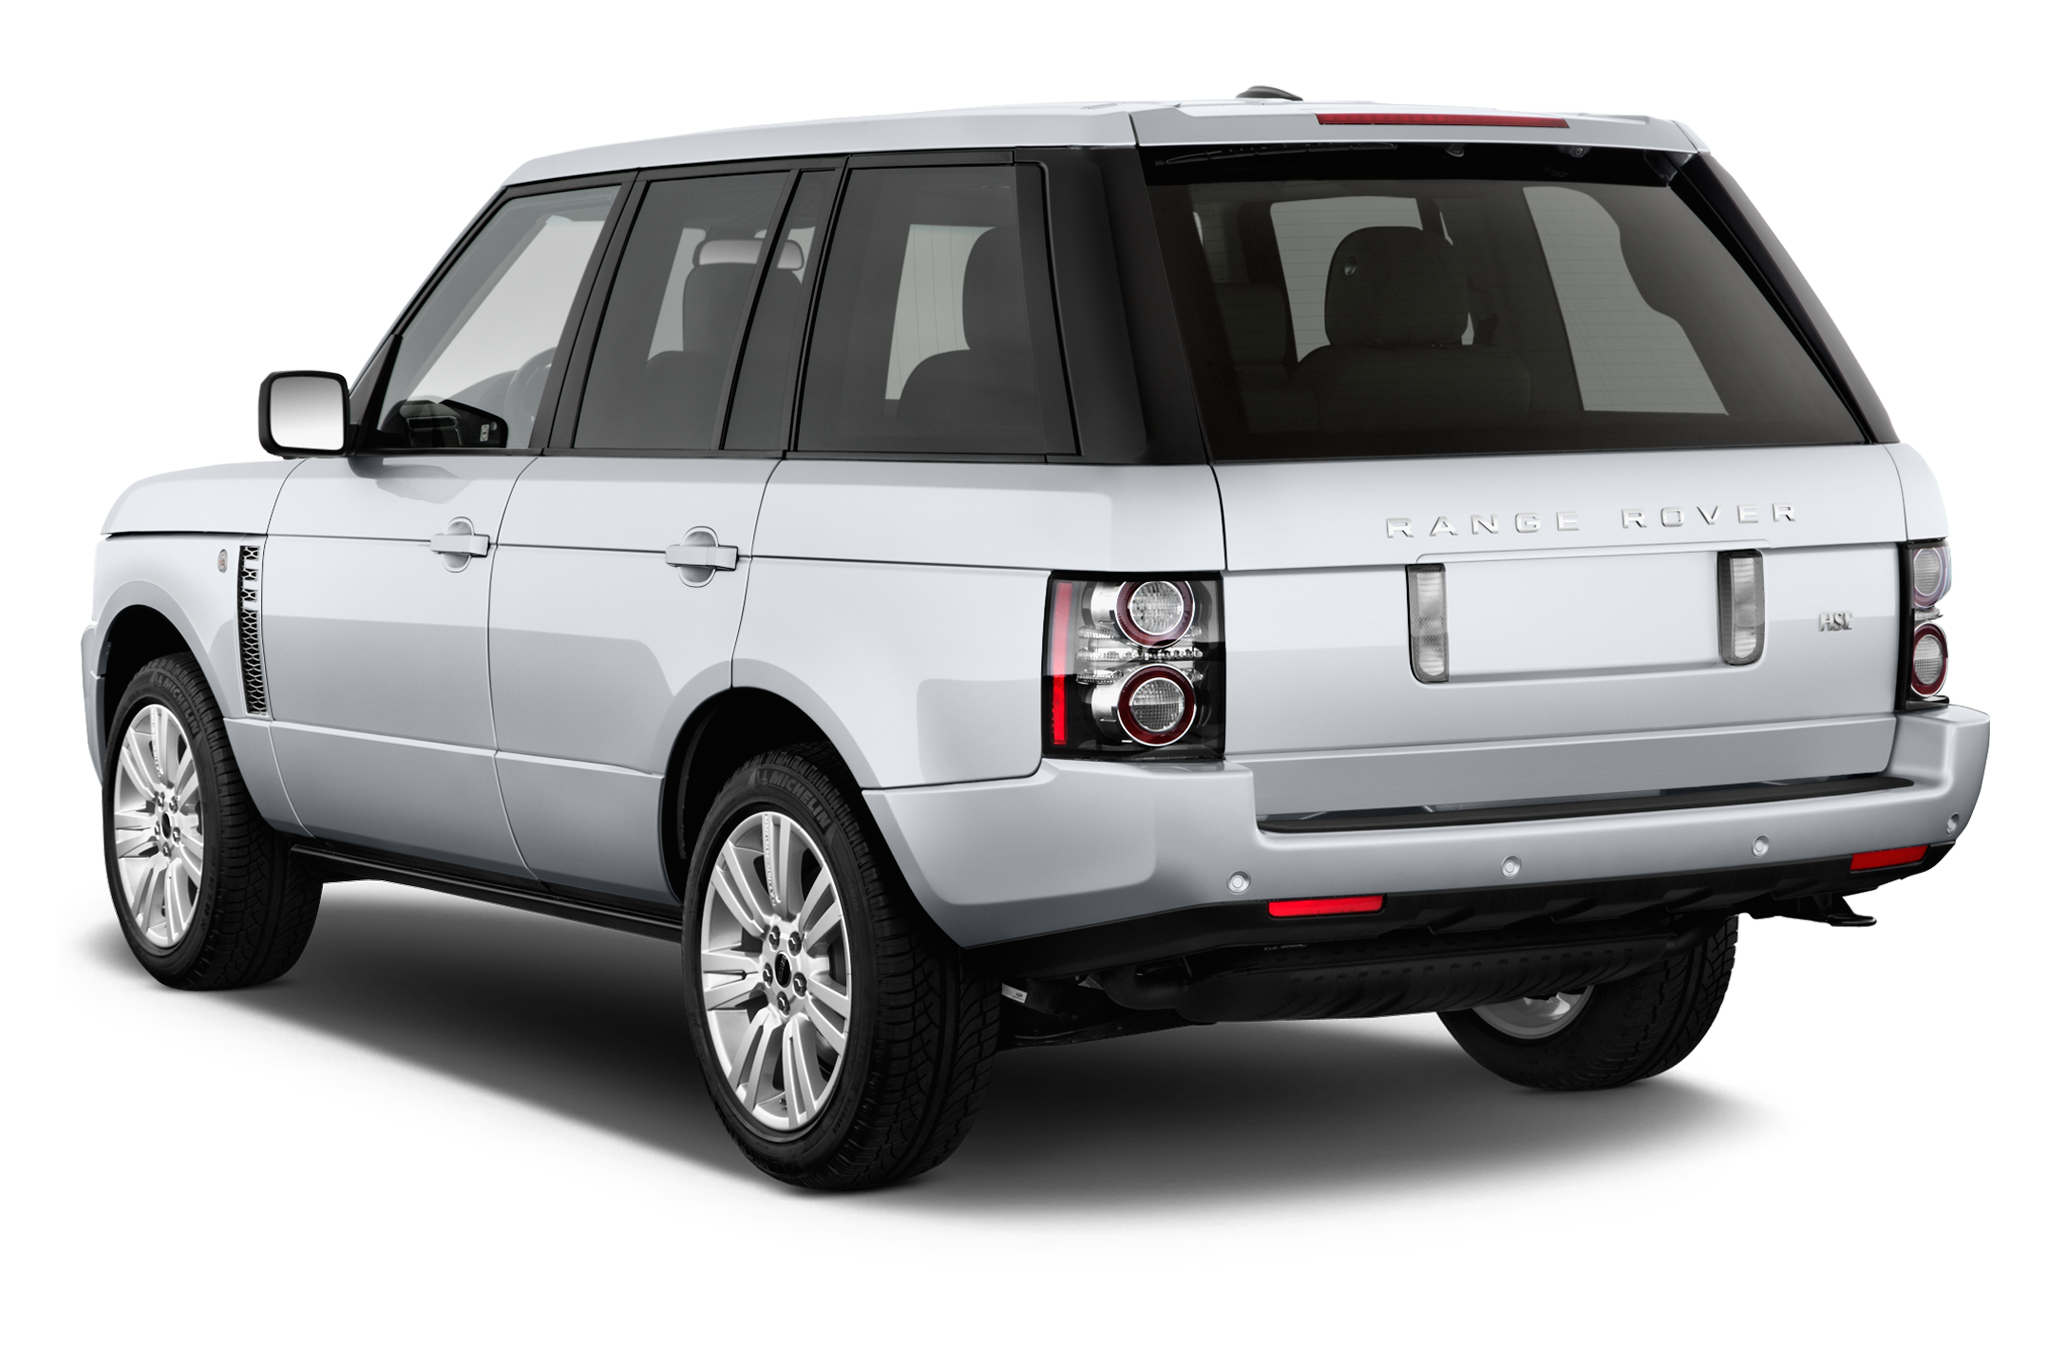 Land Rover Range Rover Supercharged 4WD 2012 - International Price ...